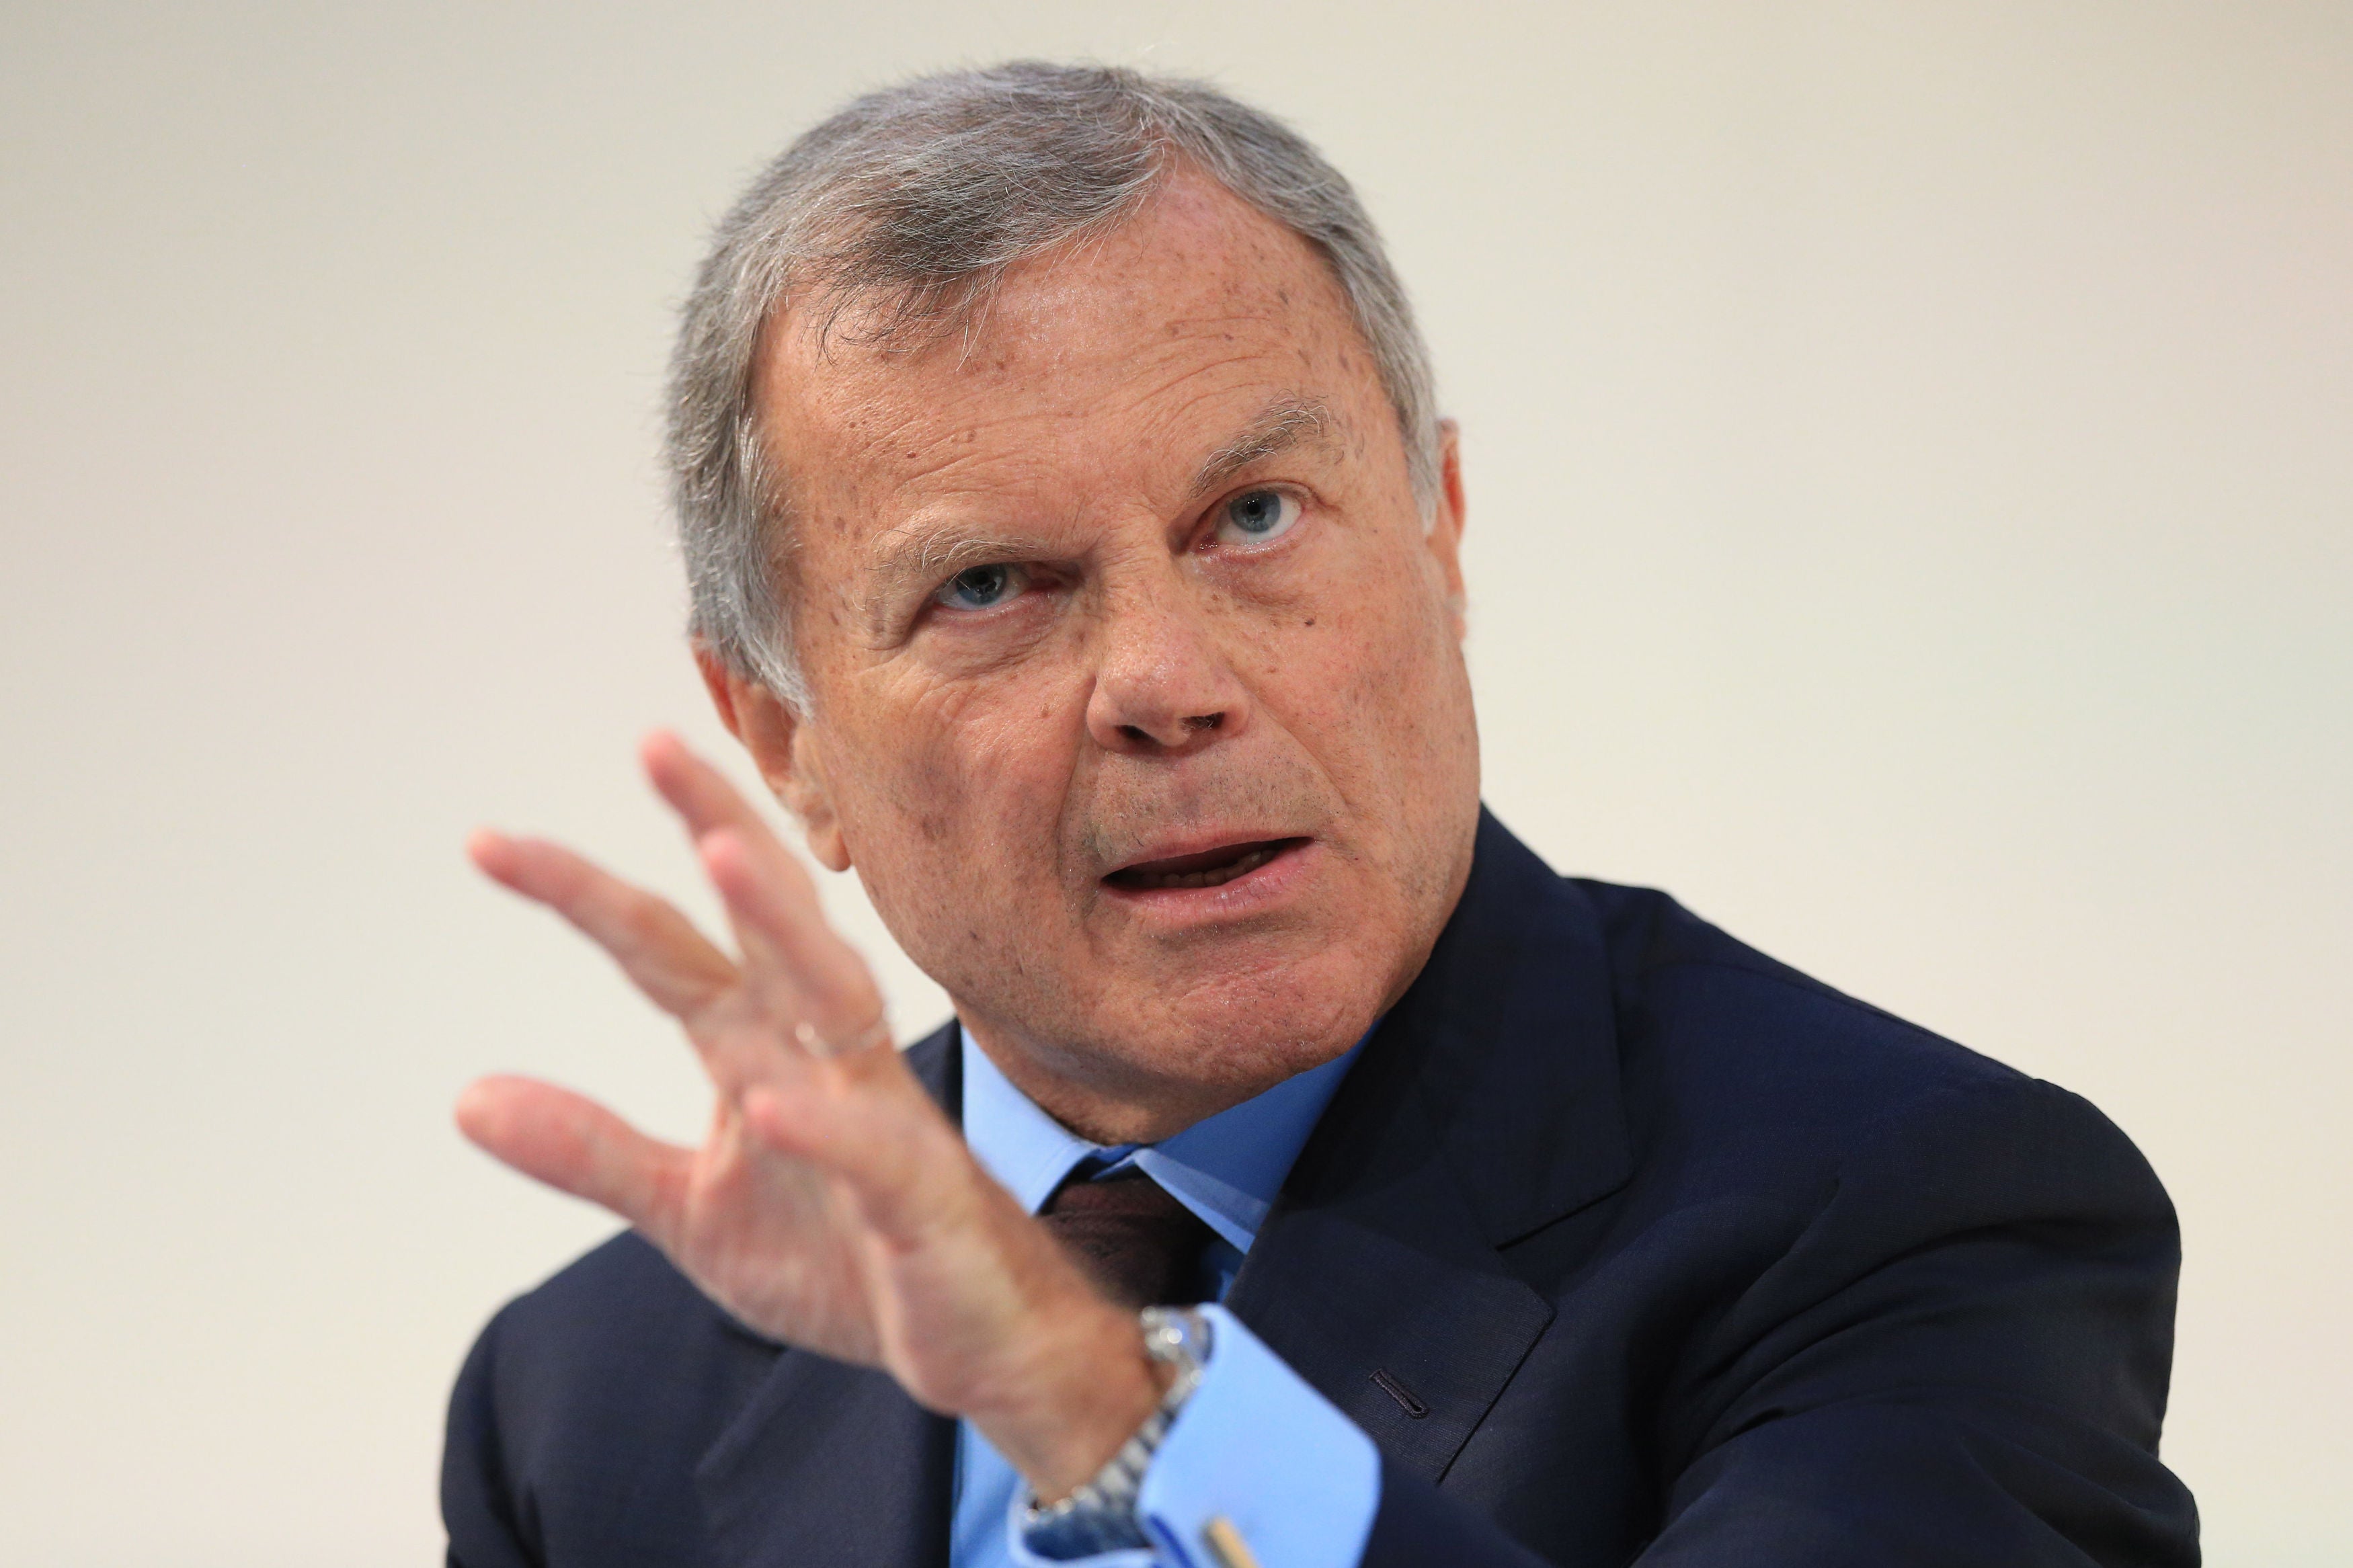 Sir Martin Sorrell steps down as WPP chief executive after allegations of personal misconduct